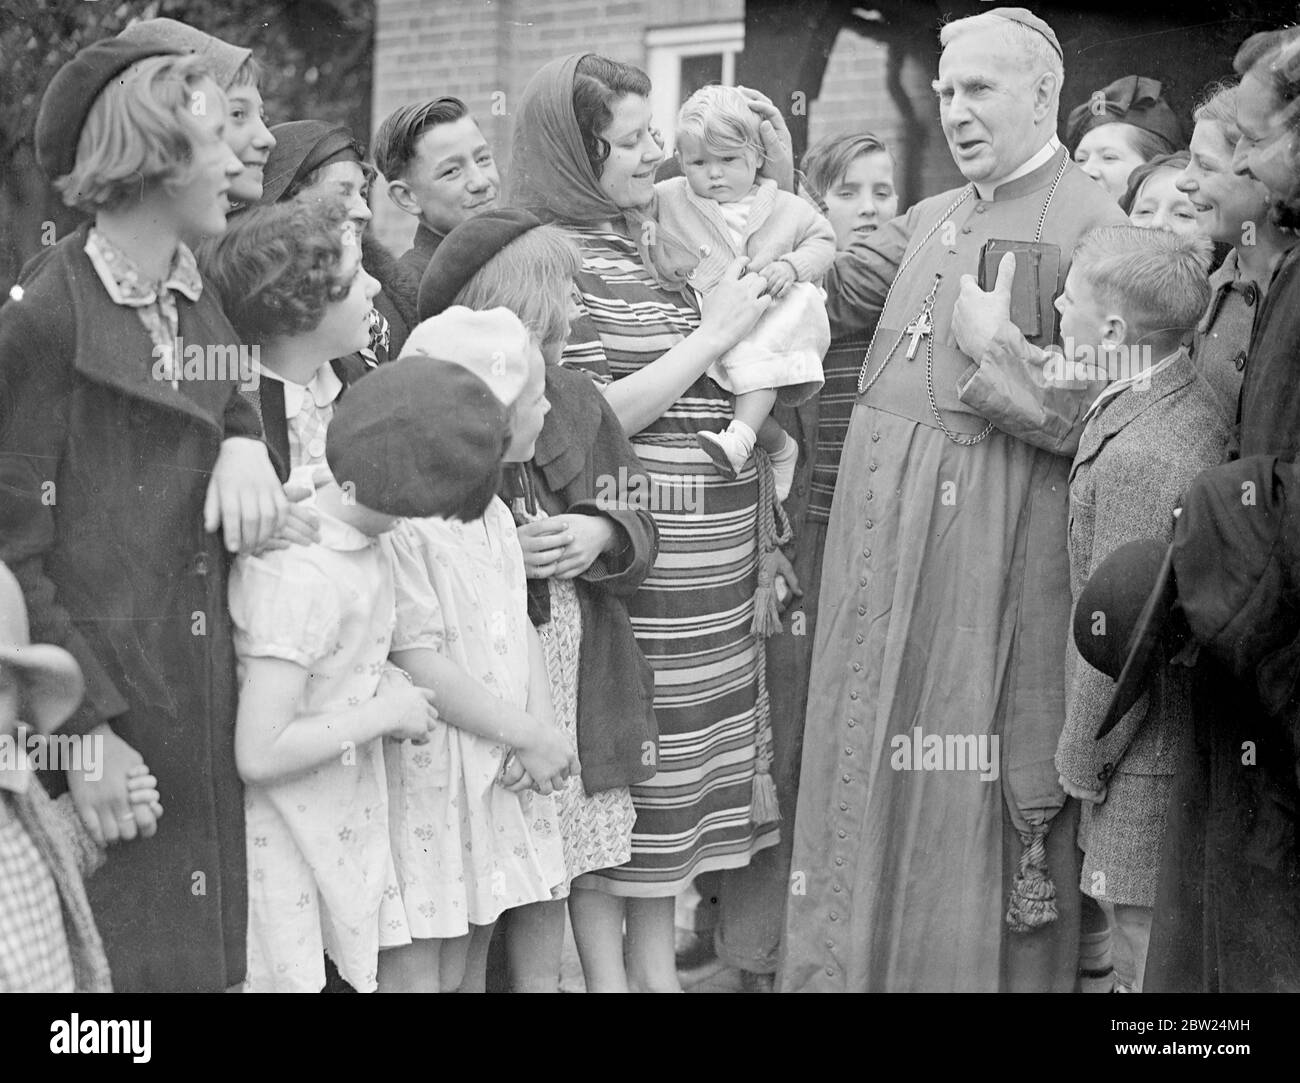 Kissing the Archbishop's ring in the hop gardens. The Archbishop Bishop of Southwark, the Rt Rev P E Amigo, made his annual visit to the Kent hop gardens today (Sunday) and celebrated a special Hop Pickers Mass at Horsmonden. Photo shows, the Archbishop Bishop patting the baby's hand after the mass.. 4 September 1938 Stock Photo